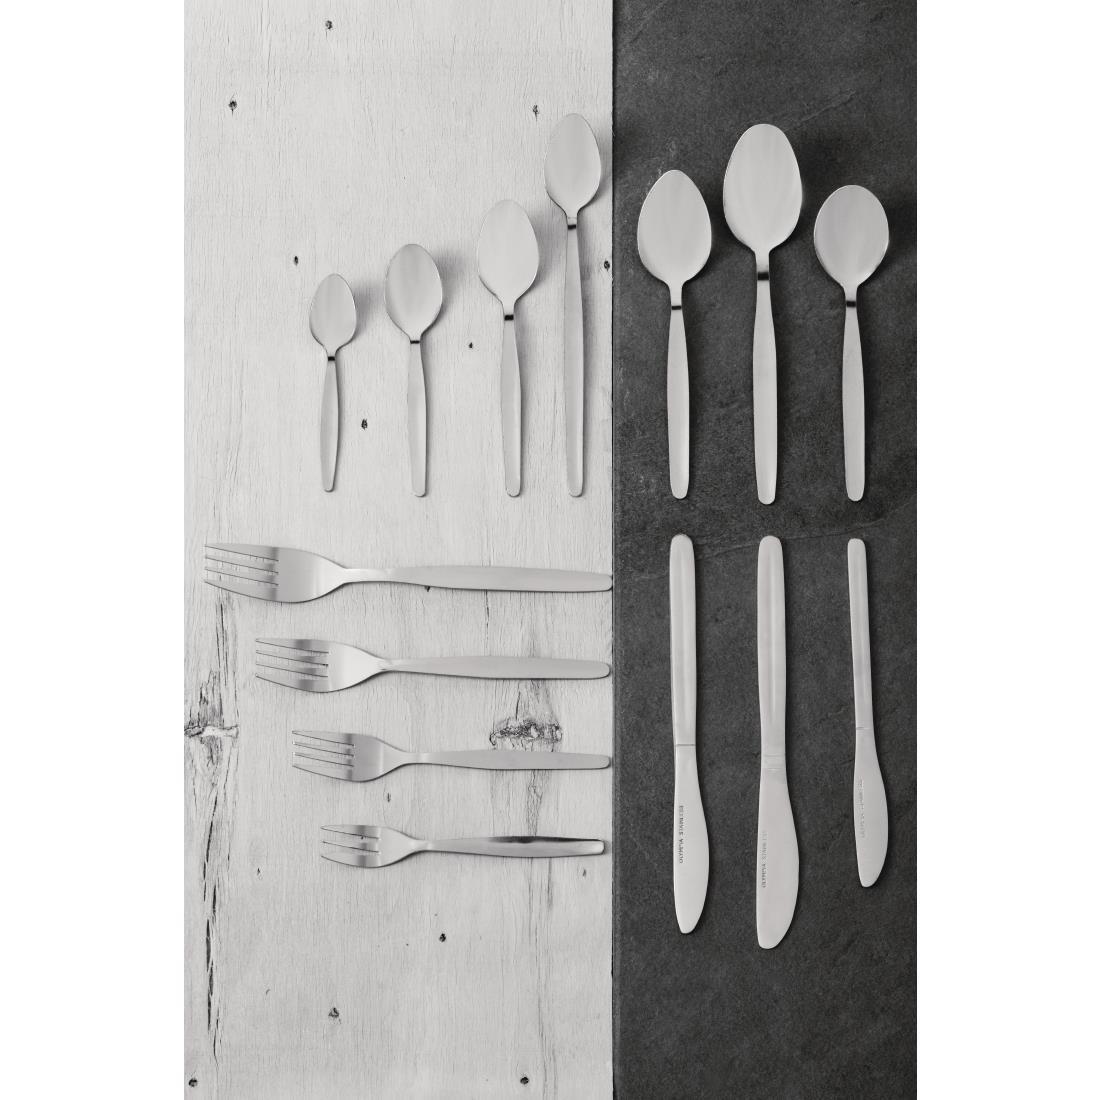 Olympia Kelso Latte Spoon (Pack of 12) - S468  - 6